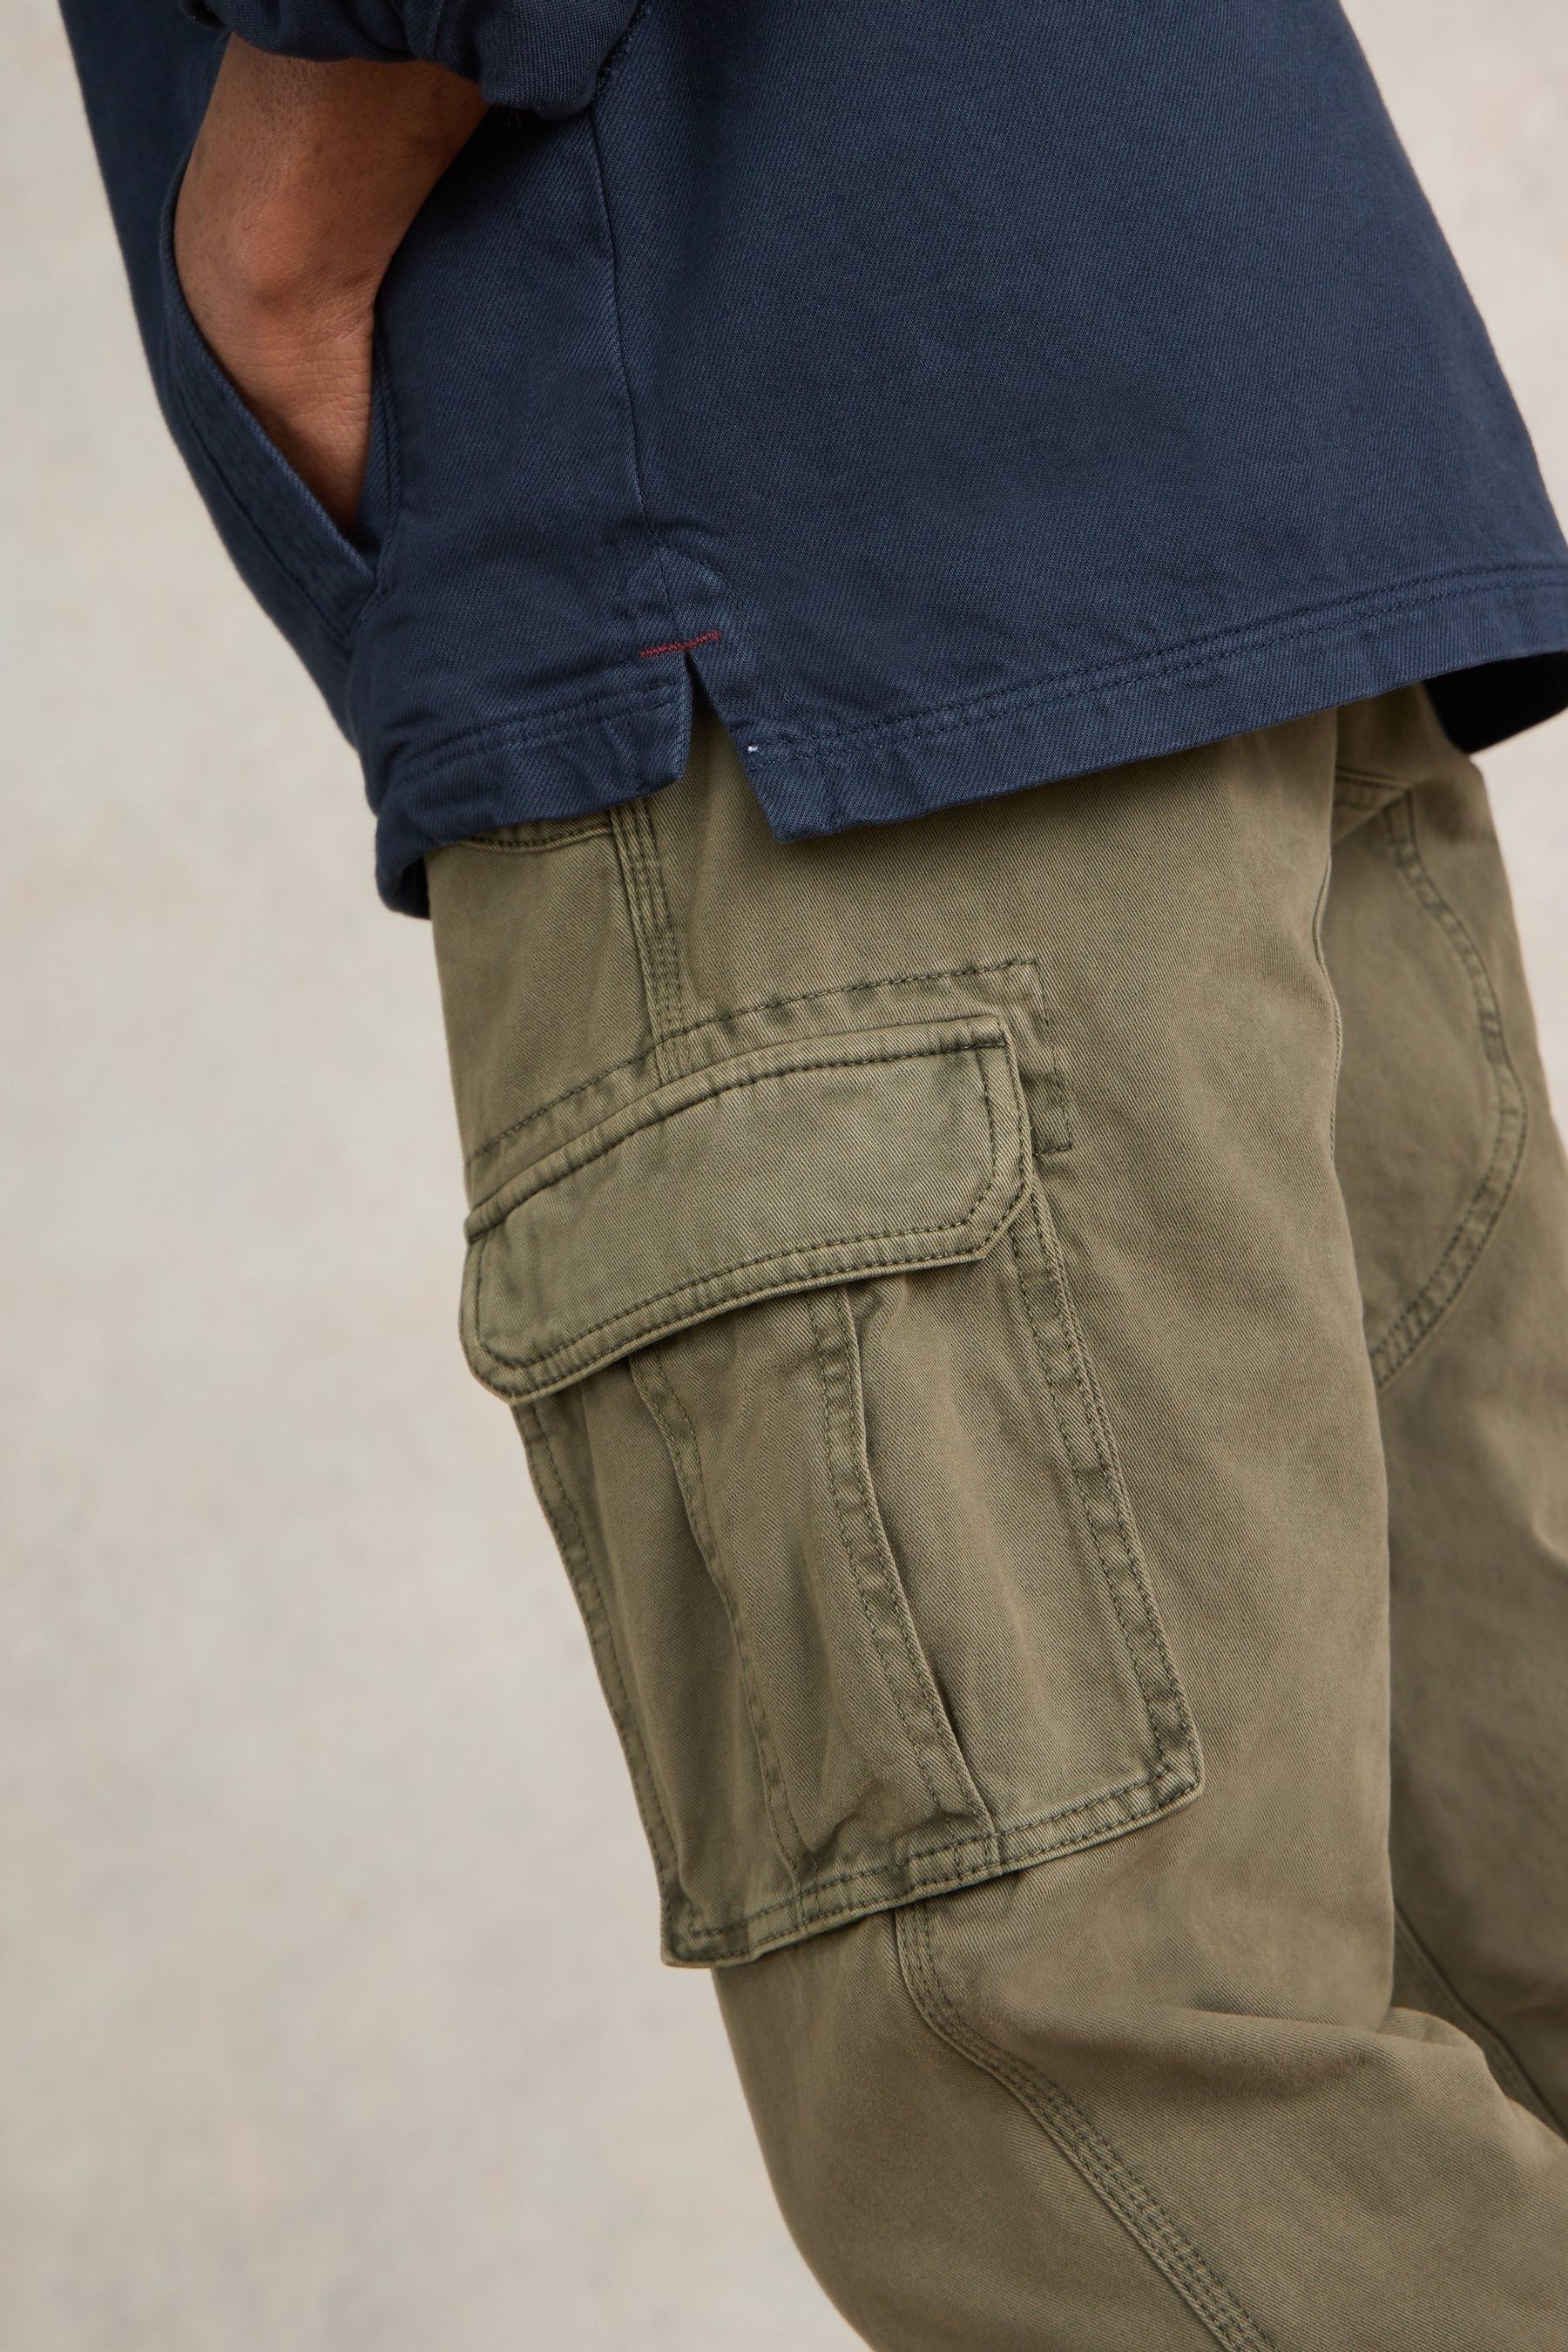 Buy White Stuff Kegworth Cargo Trousers from the Next UK online shop